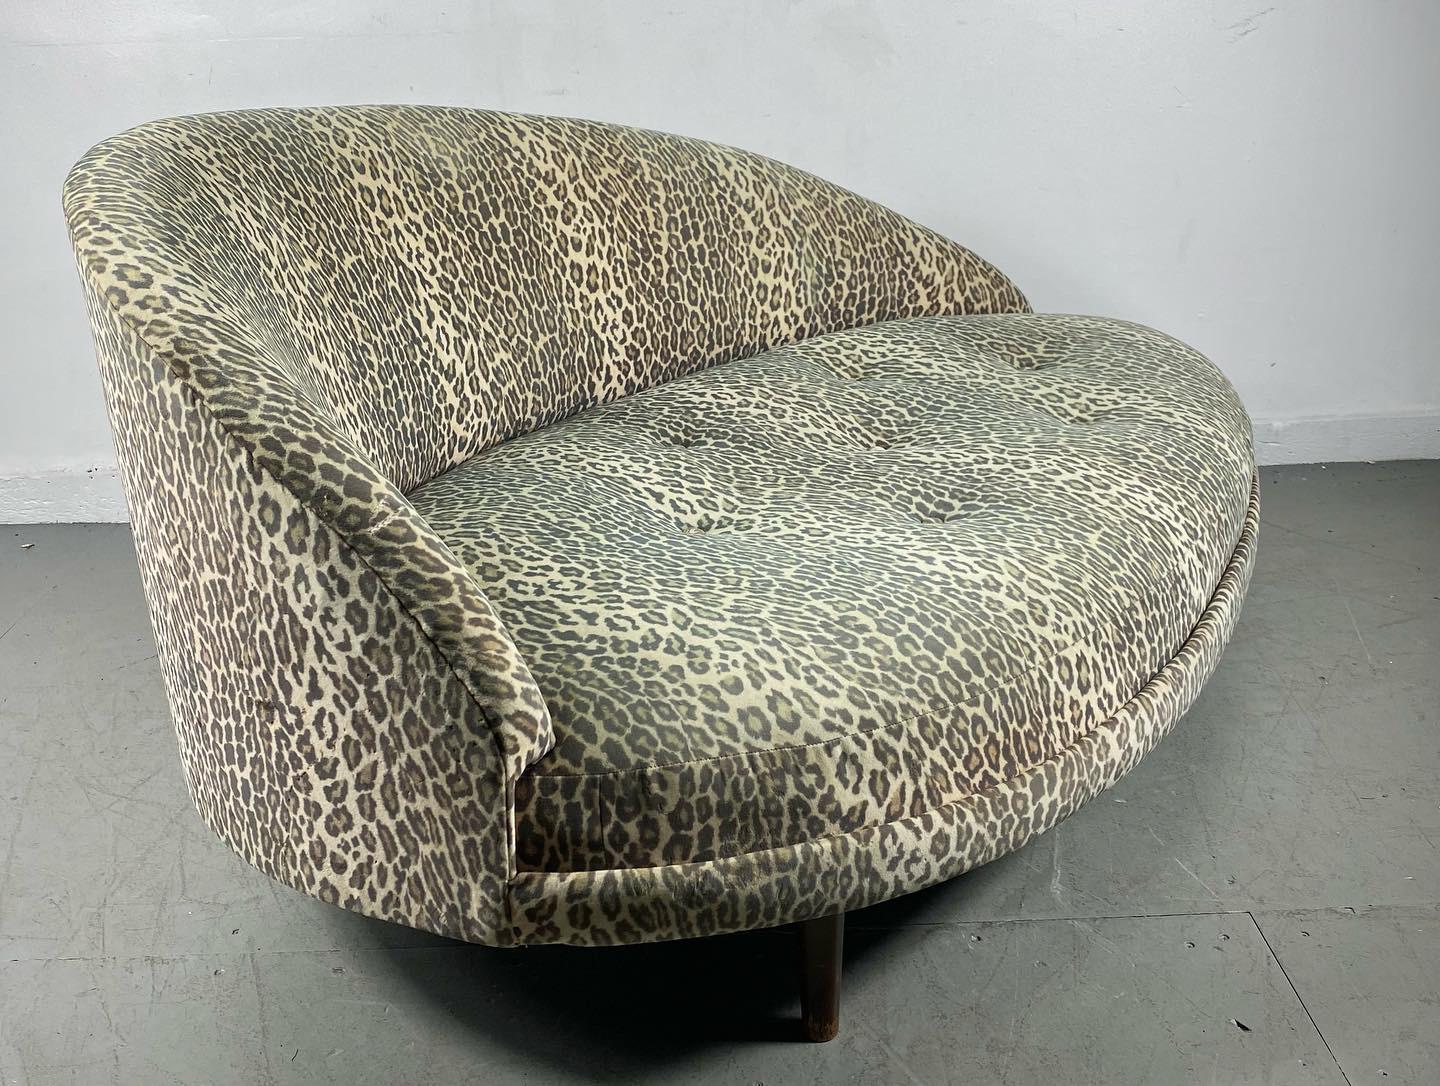 American Stunning Leopard Oval Chaise Lounge by Adrian Pearsall / Craft Associates